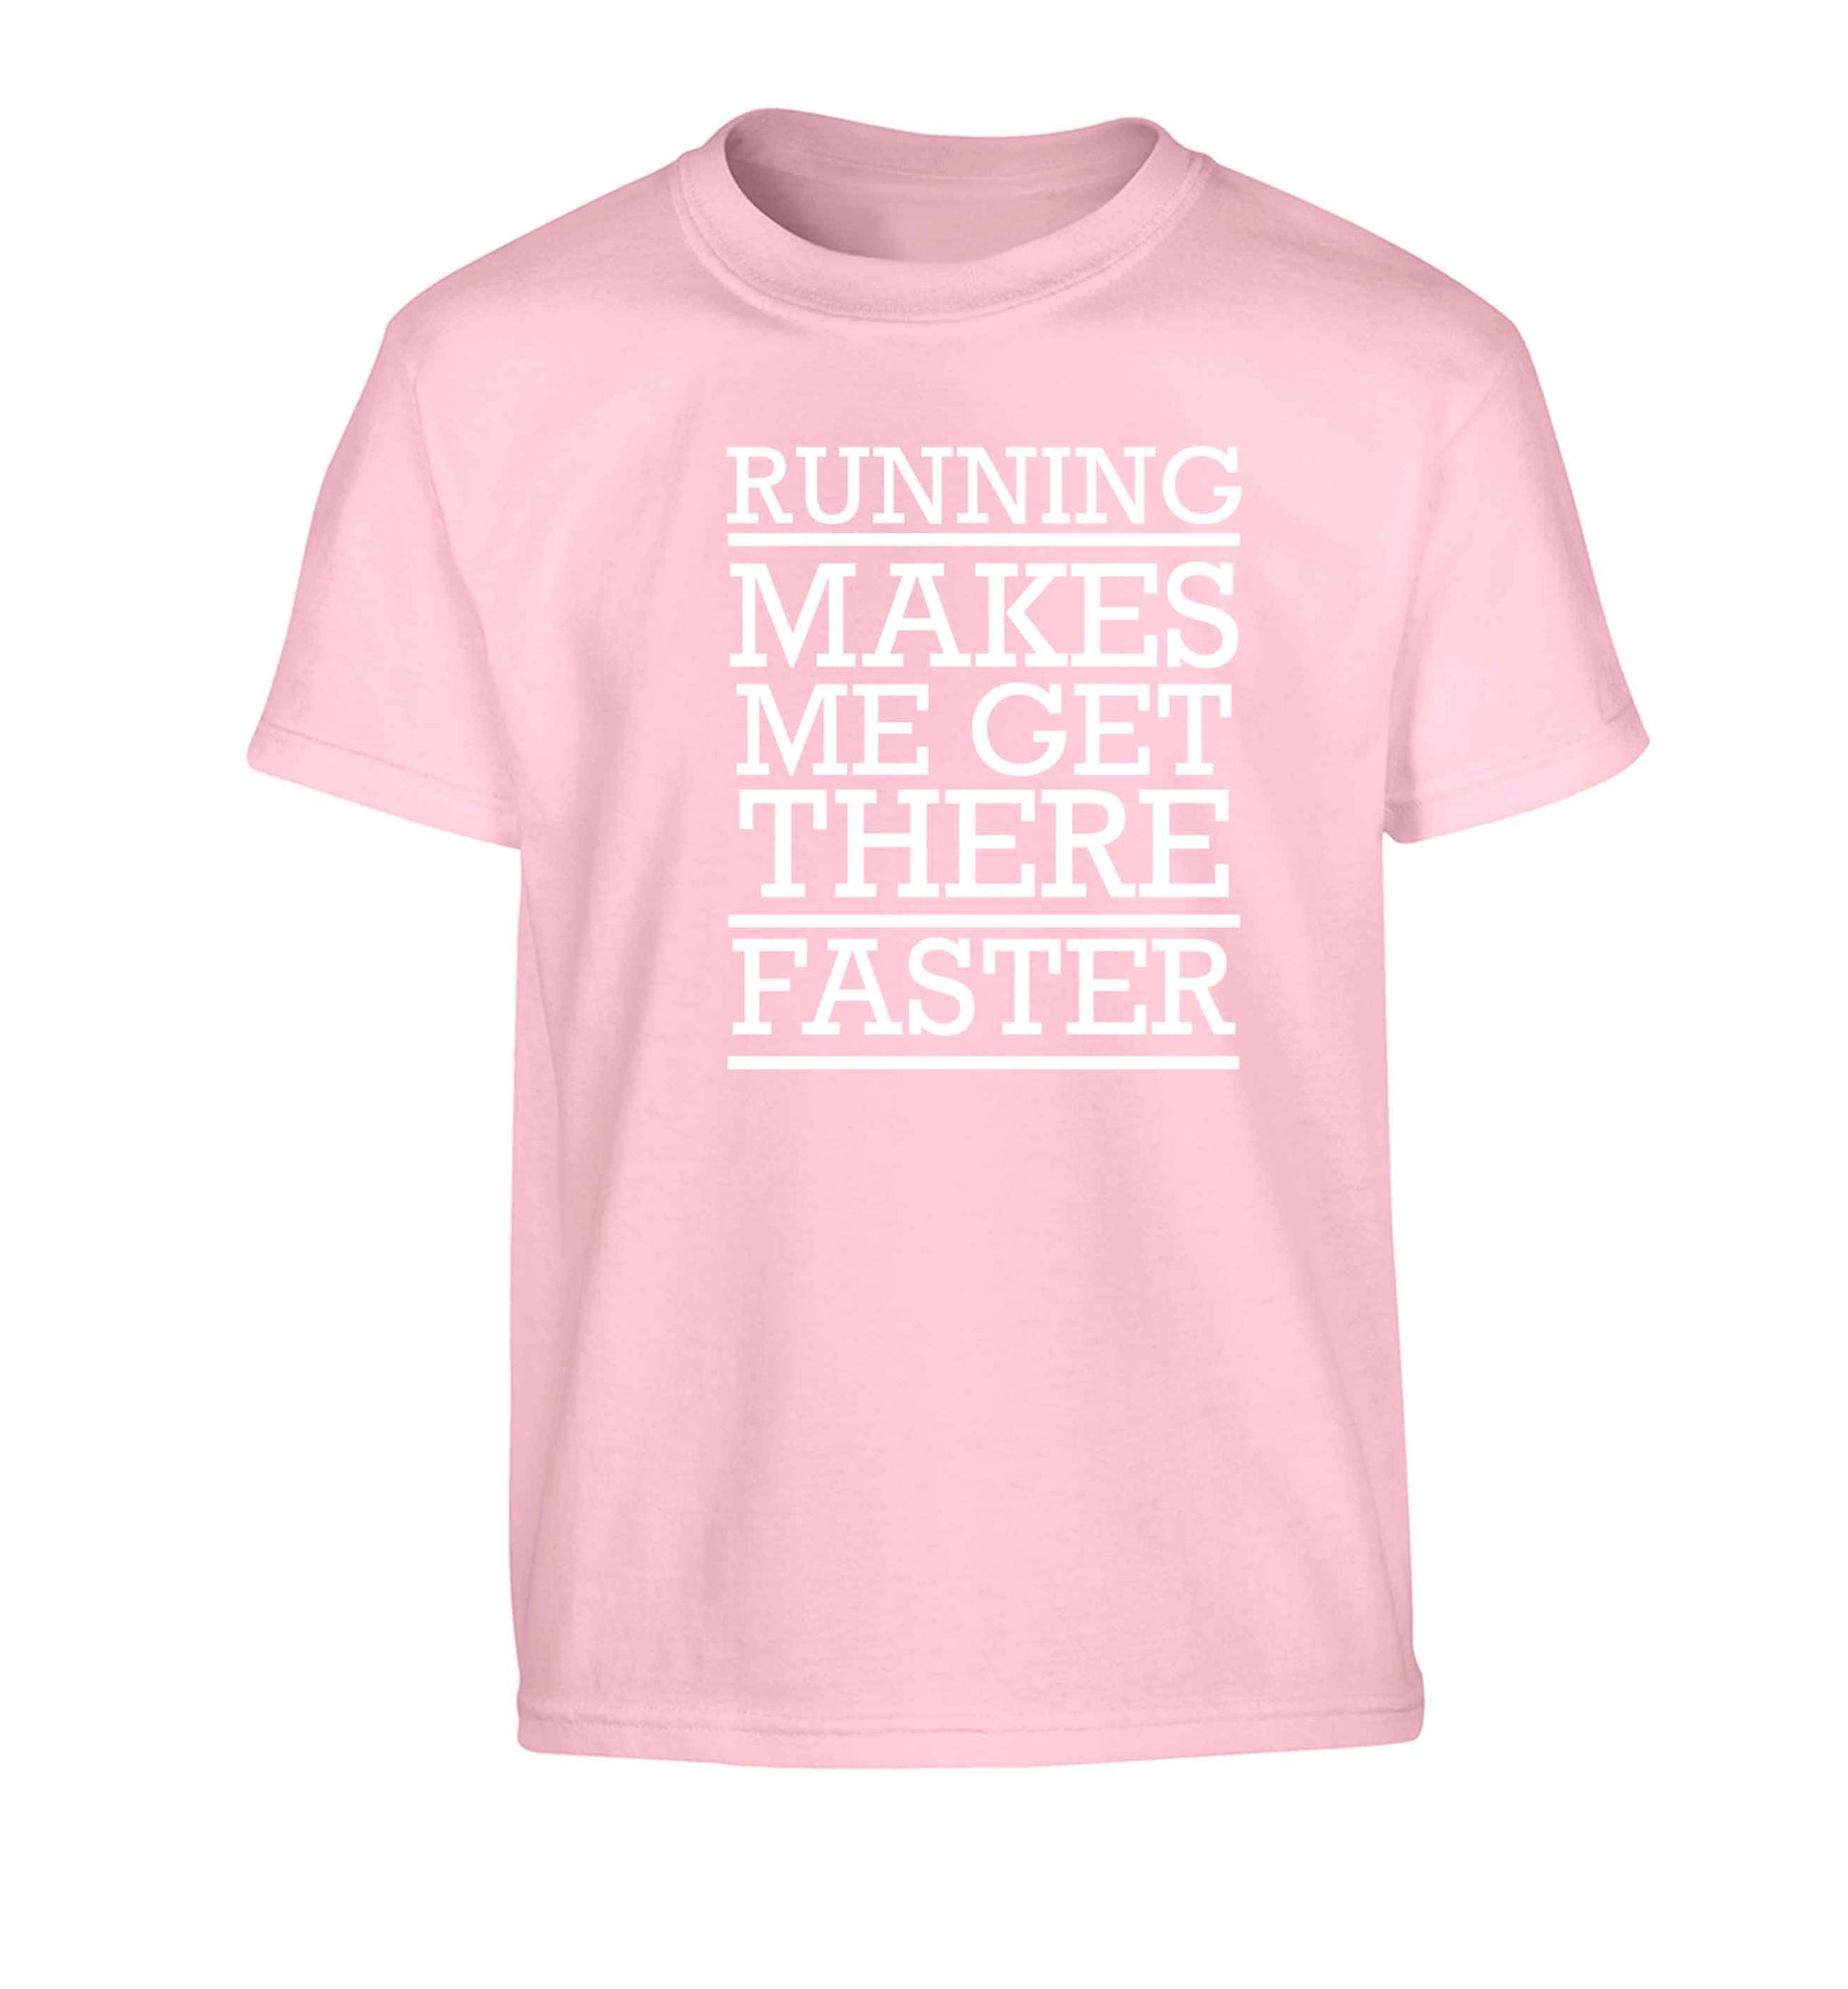 Running makes me get there faster Children's light pink Tshirt 12-13 Years